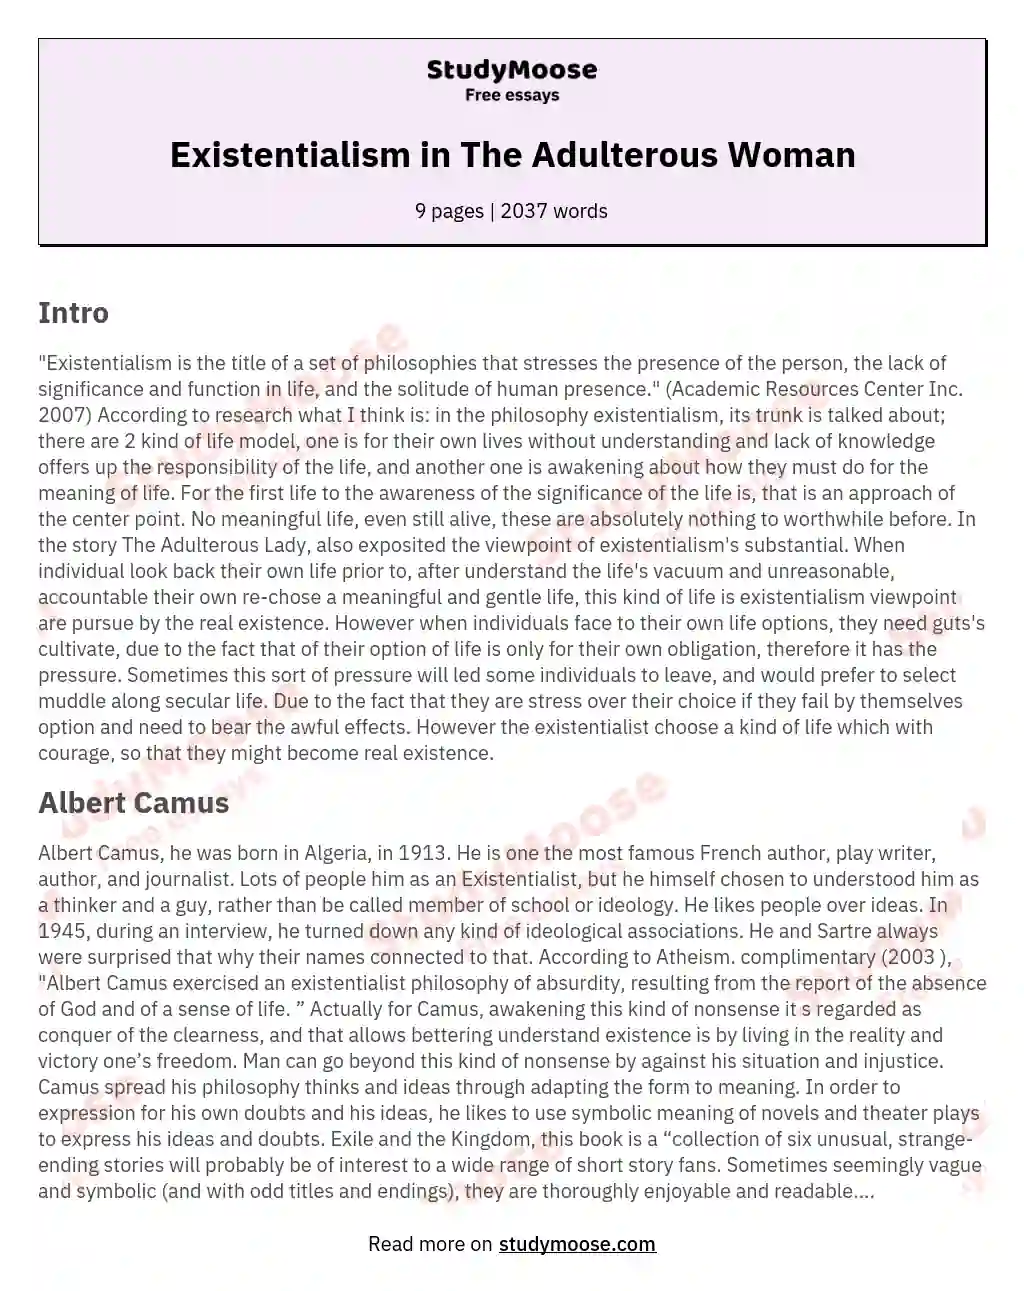 Existentialism in The Adulterous Woman essay